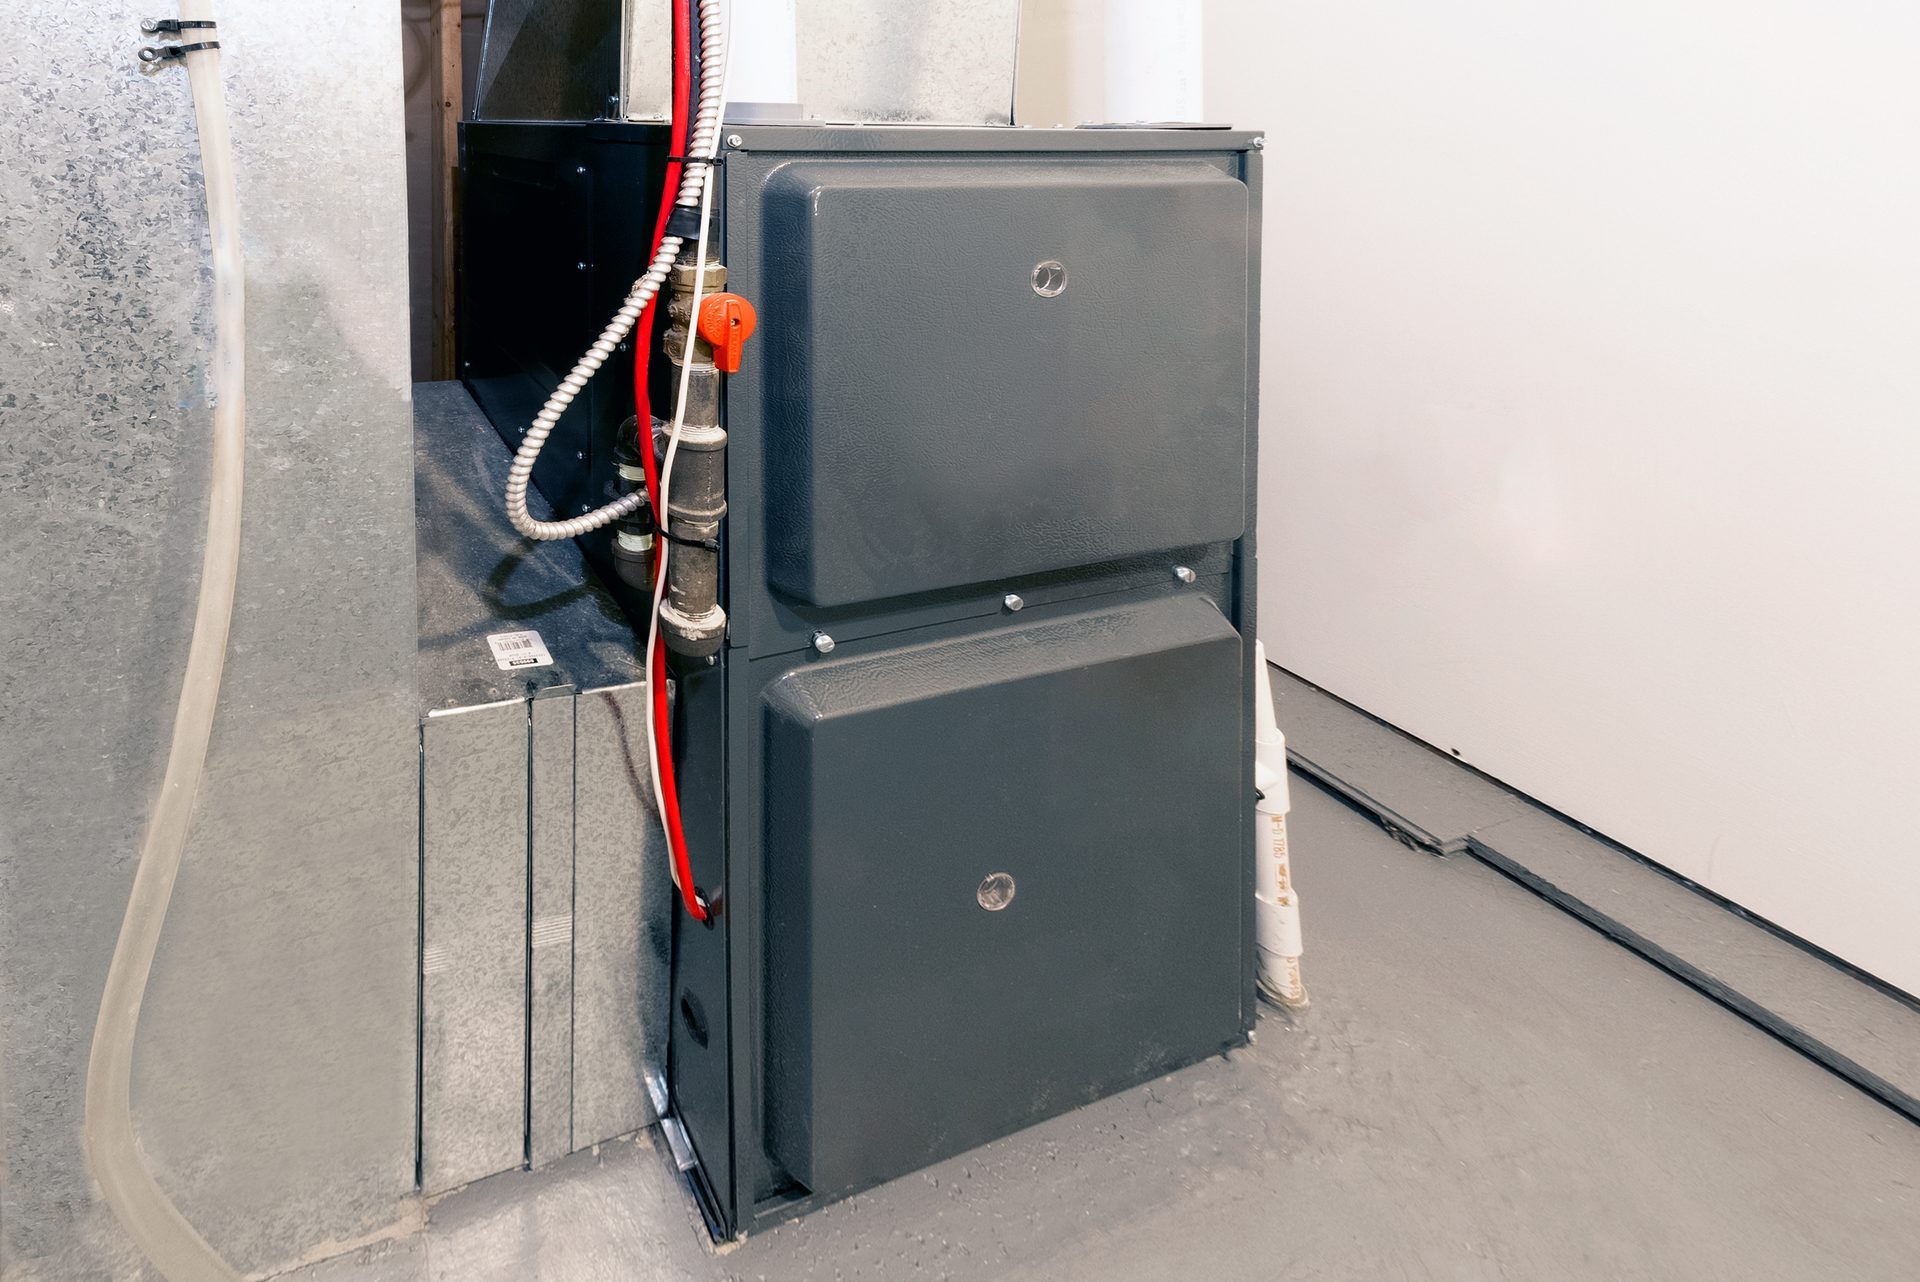 A Homeowner's Guide To Furnaces